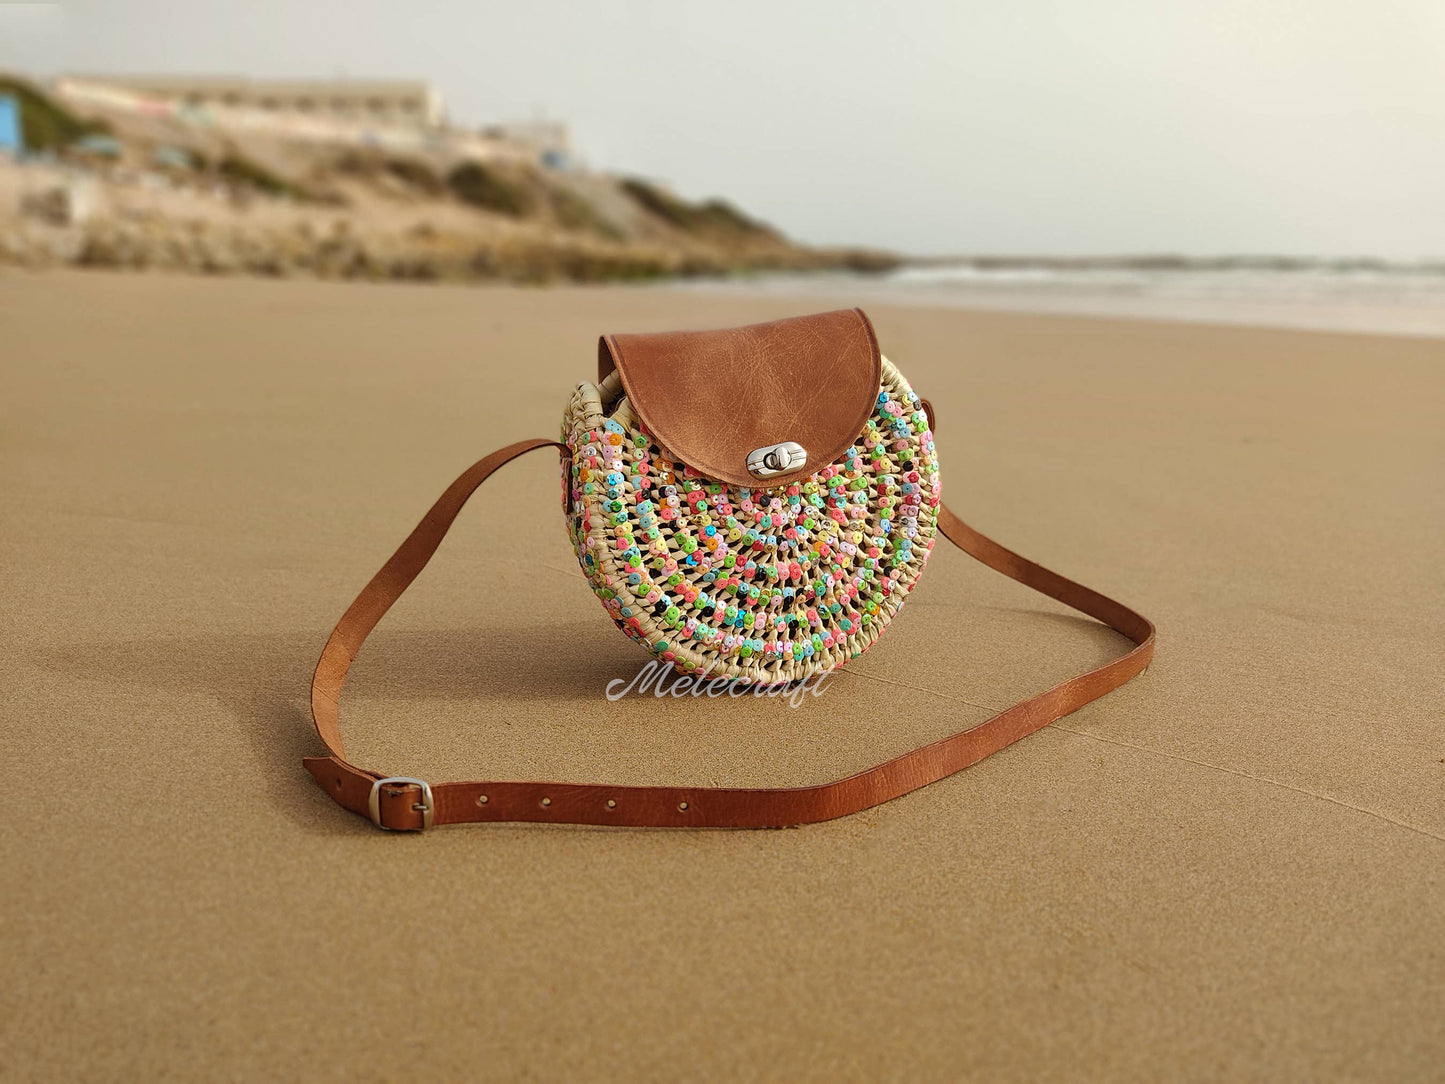 Round straw bag with colorful sequins, Straw crossbody bag